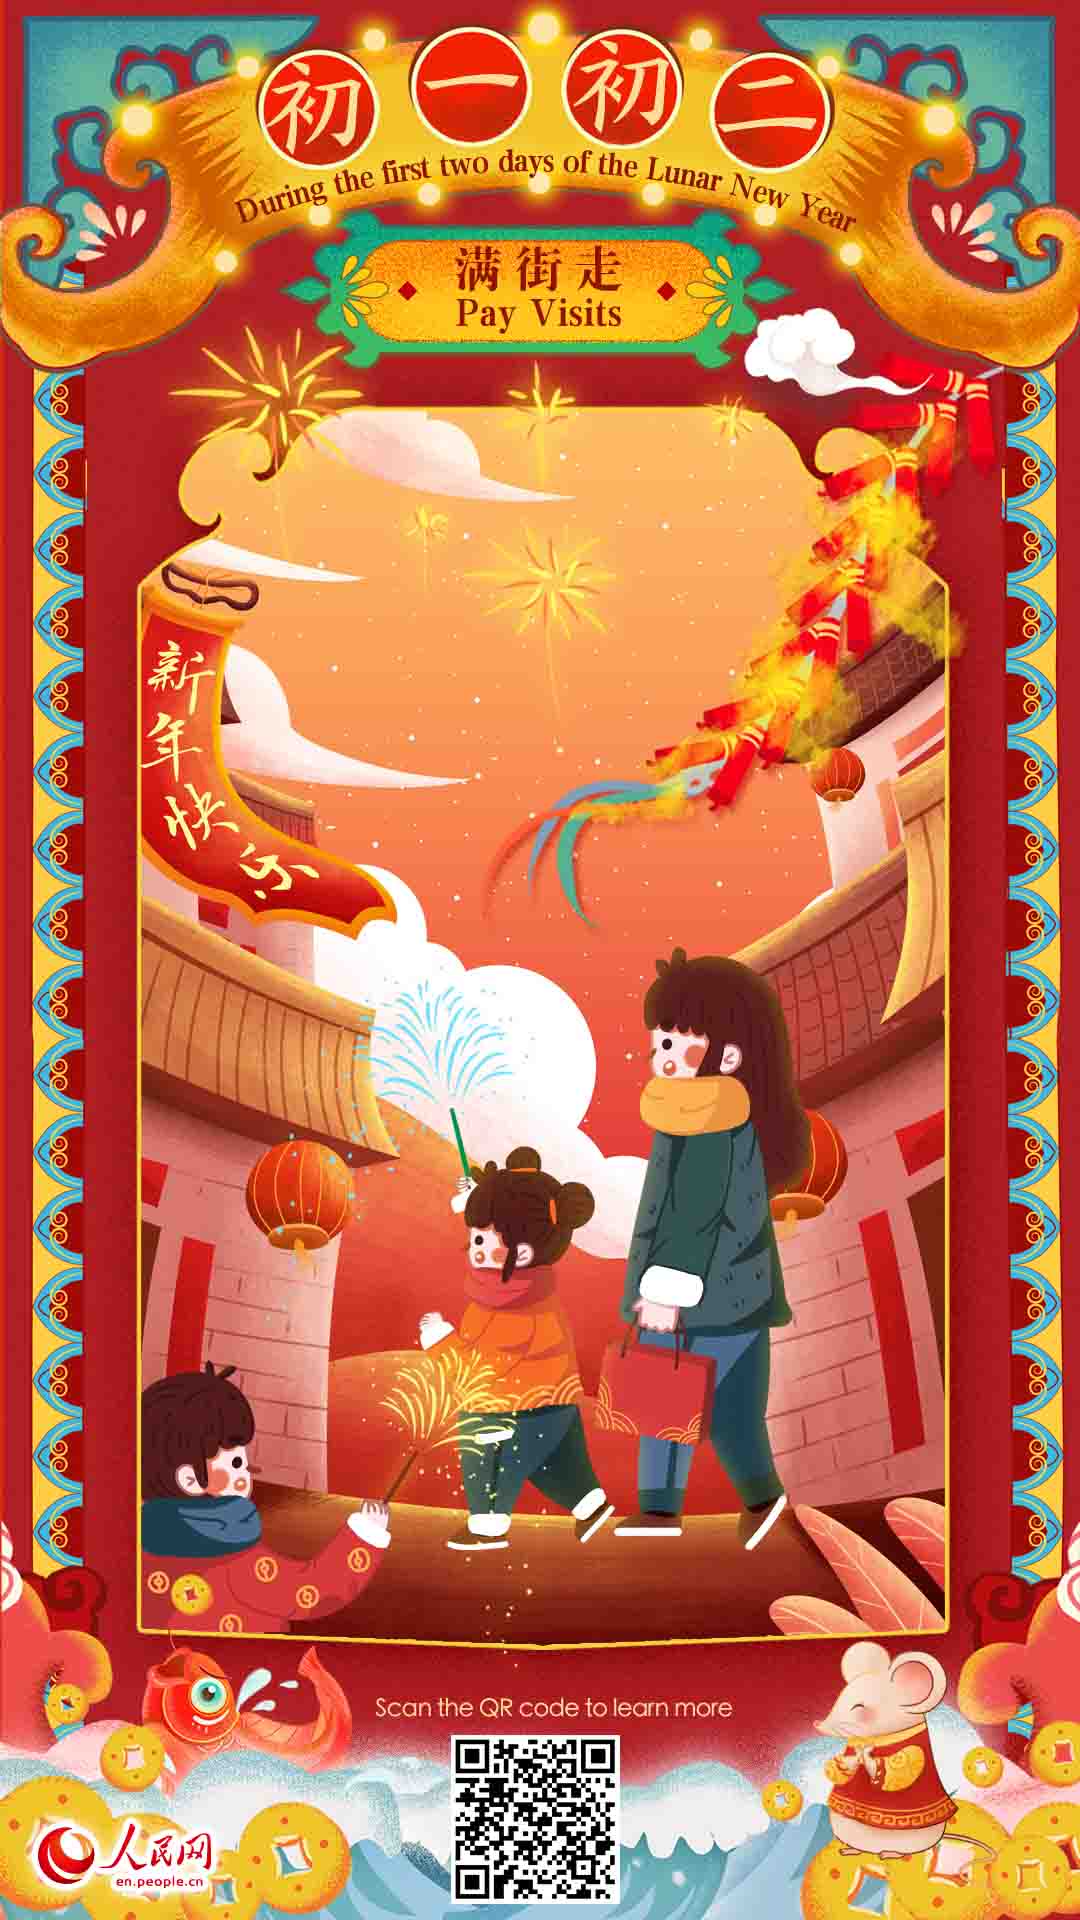 Traditional folk customs of Spring Festival: pay visits